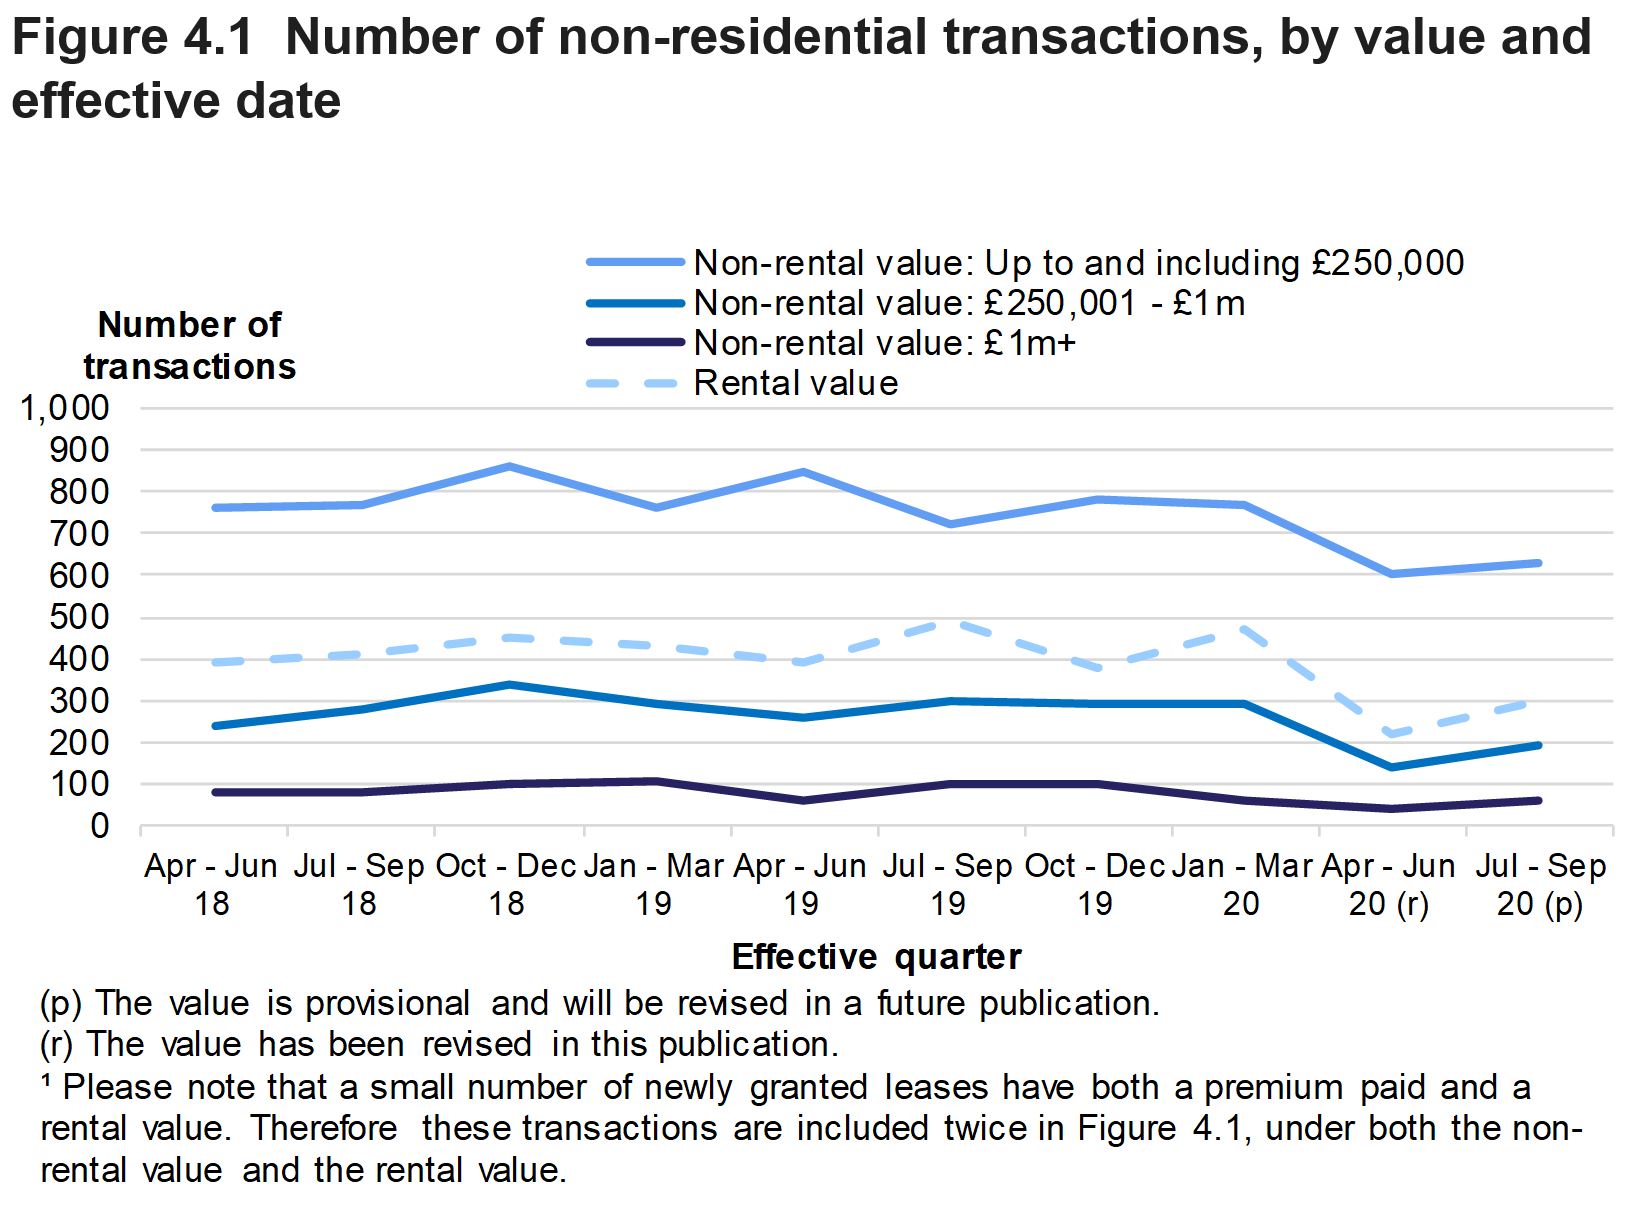 Figure 4.1 shows the number of non-residential transactions by value of the property. Data is shown for the quarter in which the transaction was effective.